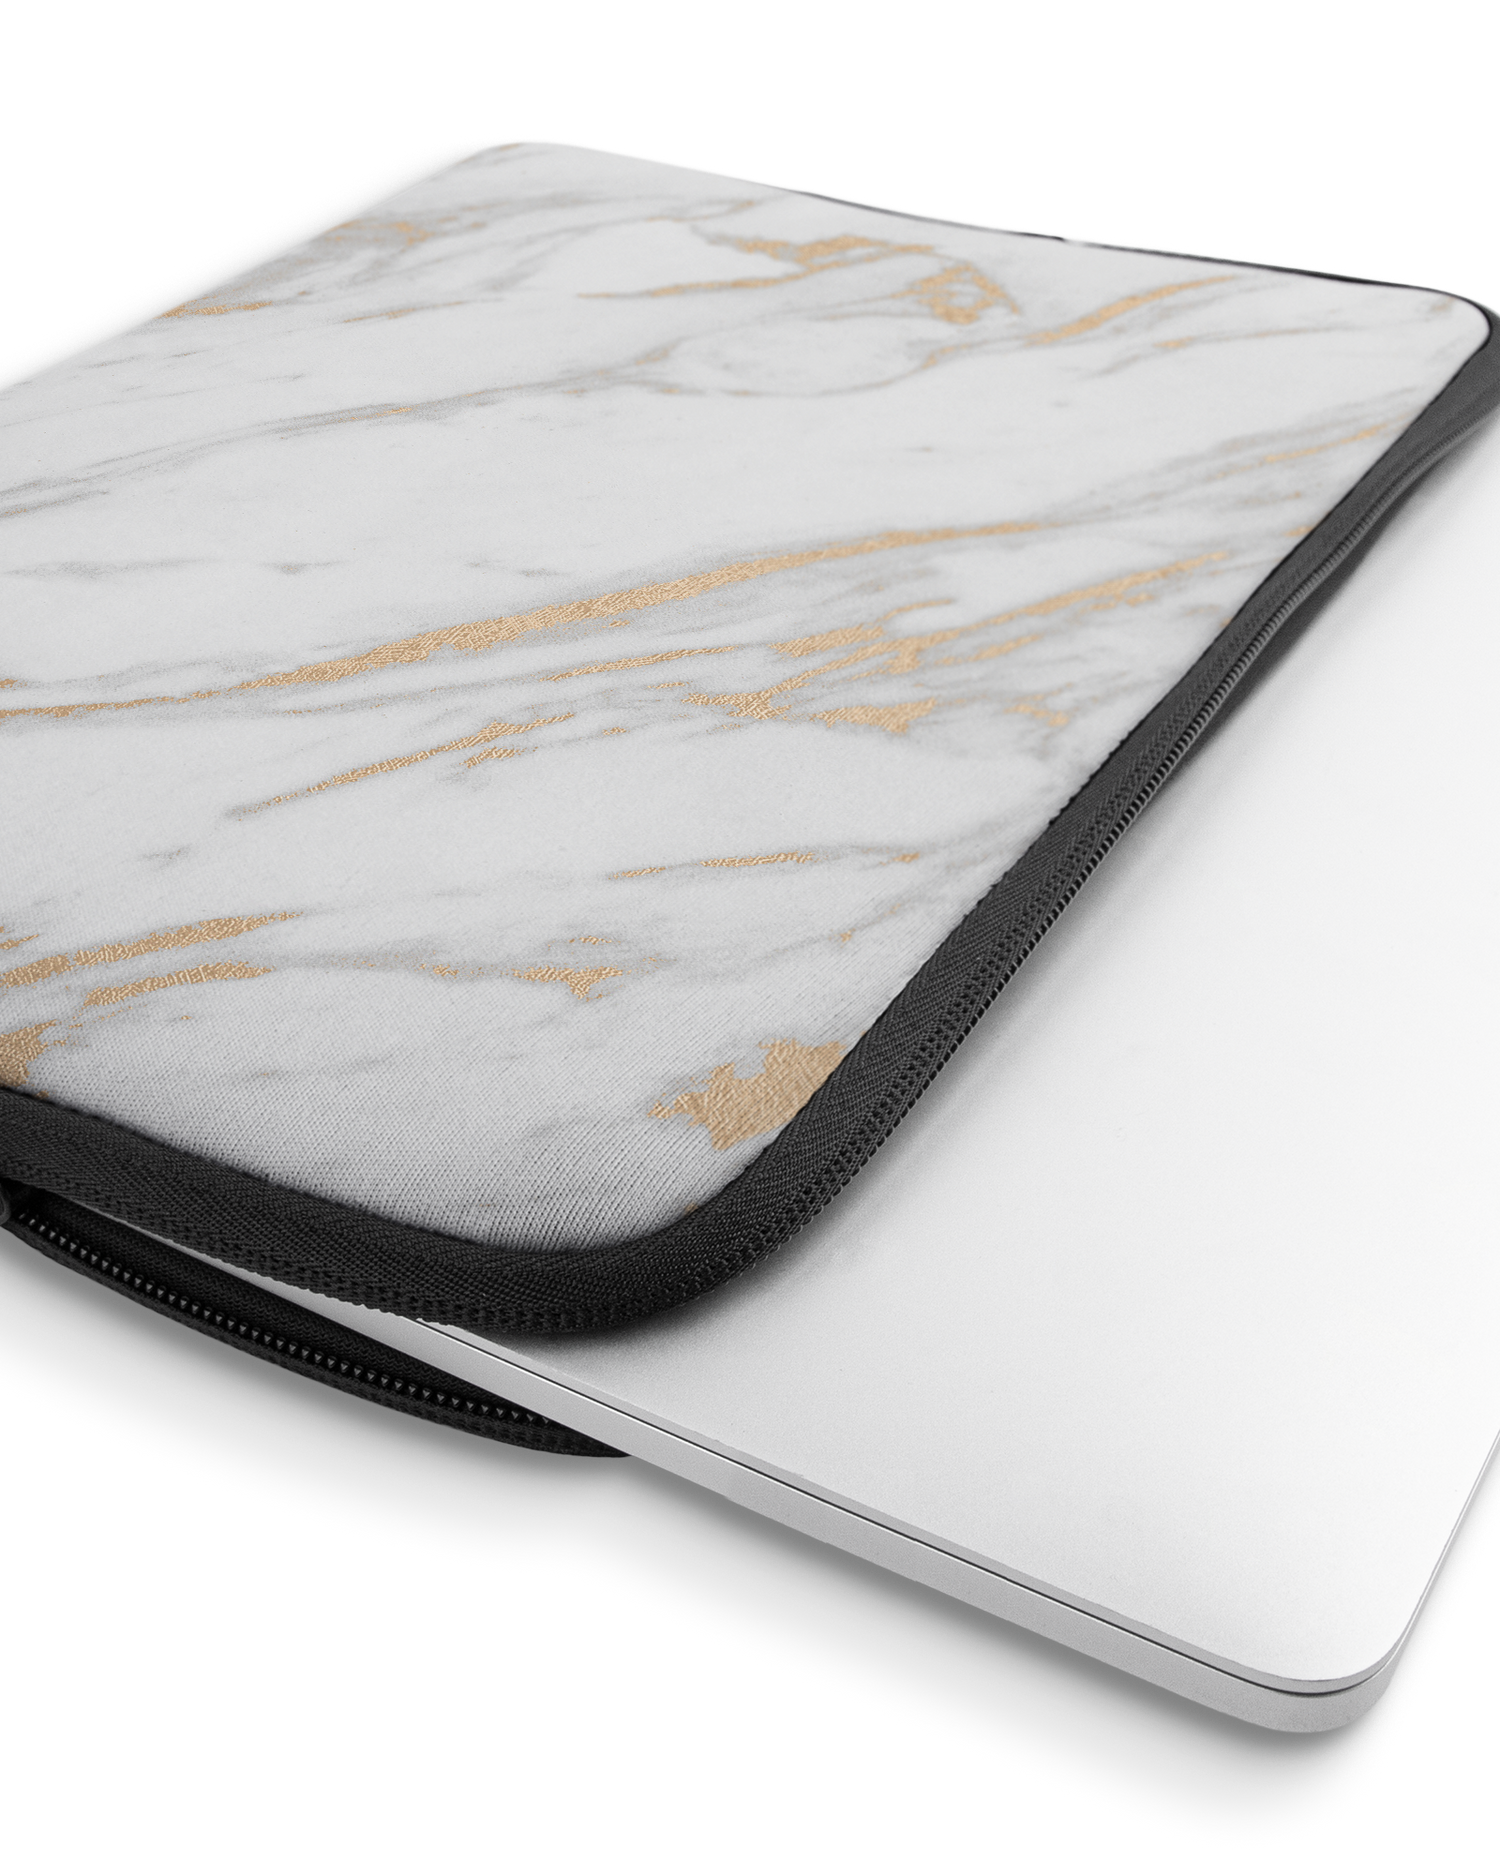 Gold Marble Elegance Laptop Case 16 inch with device inside